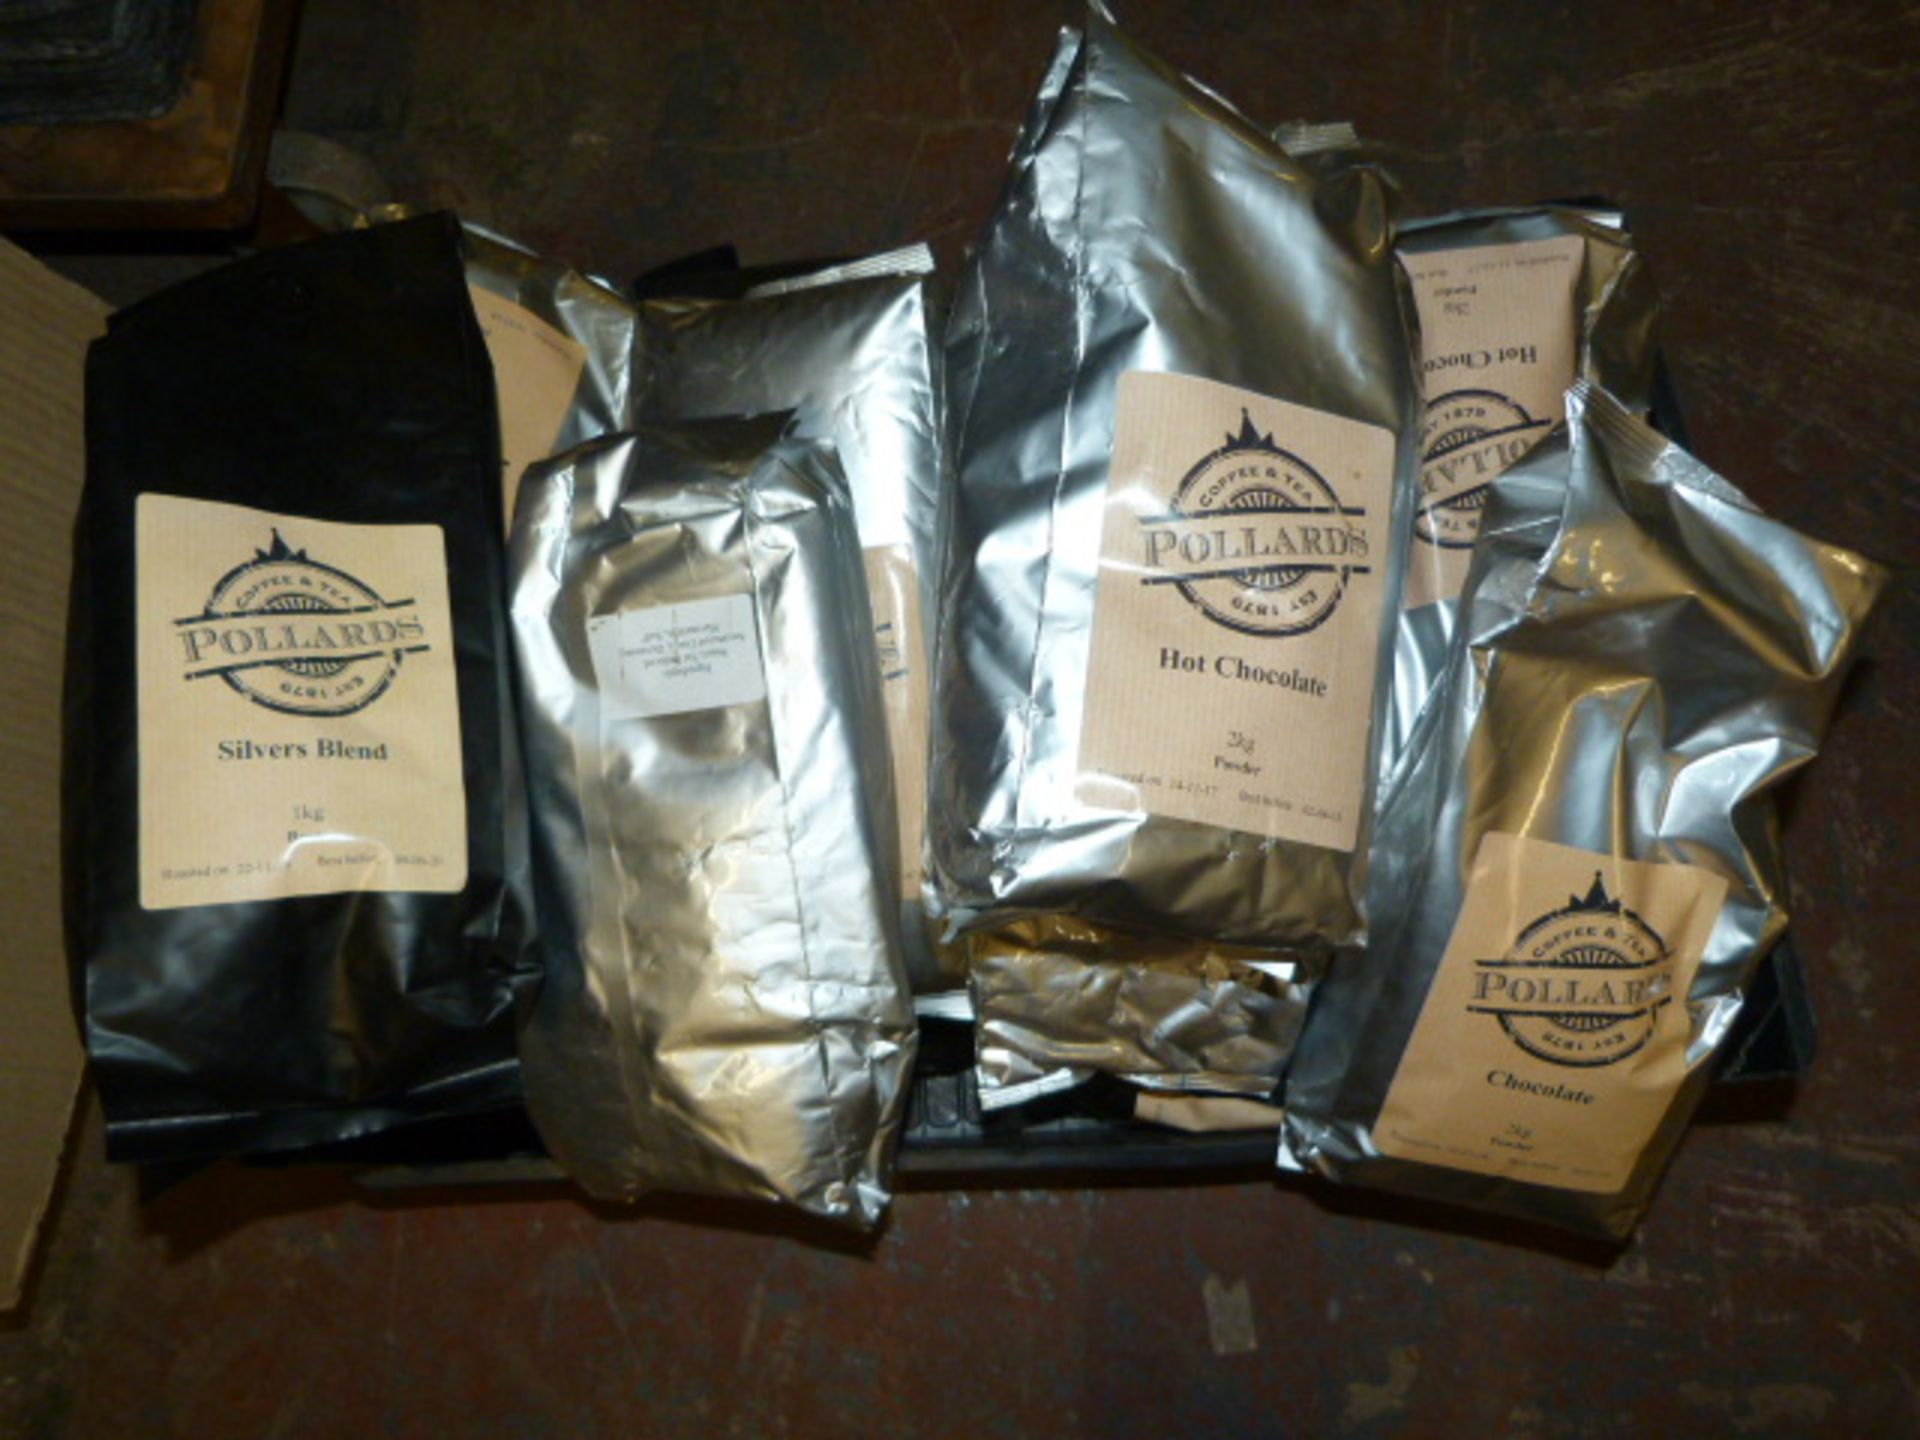 *Box of 2kg Packets of Chocolate and Silver Blend Beans